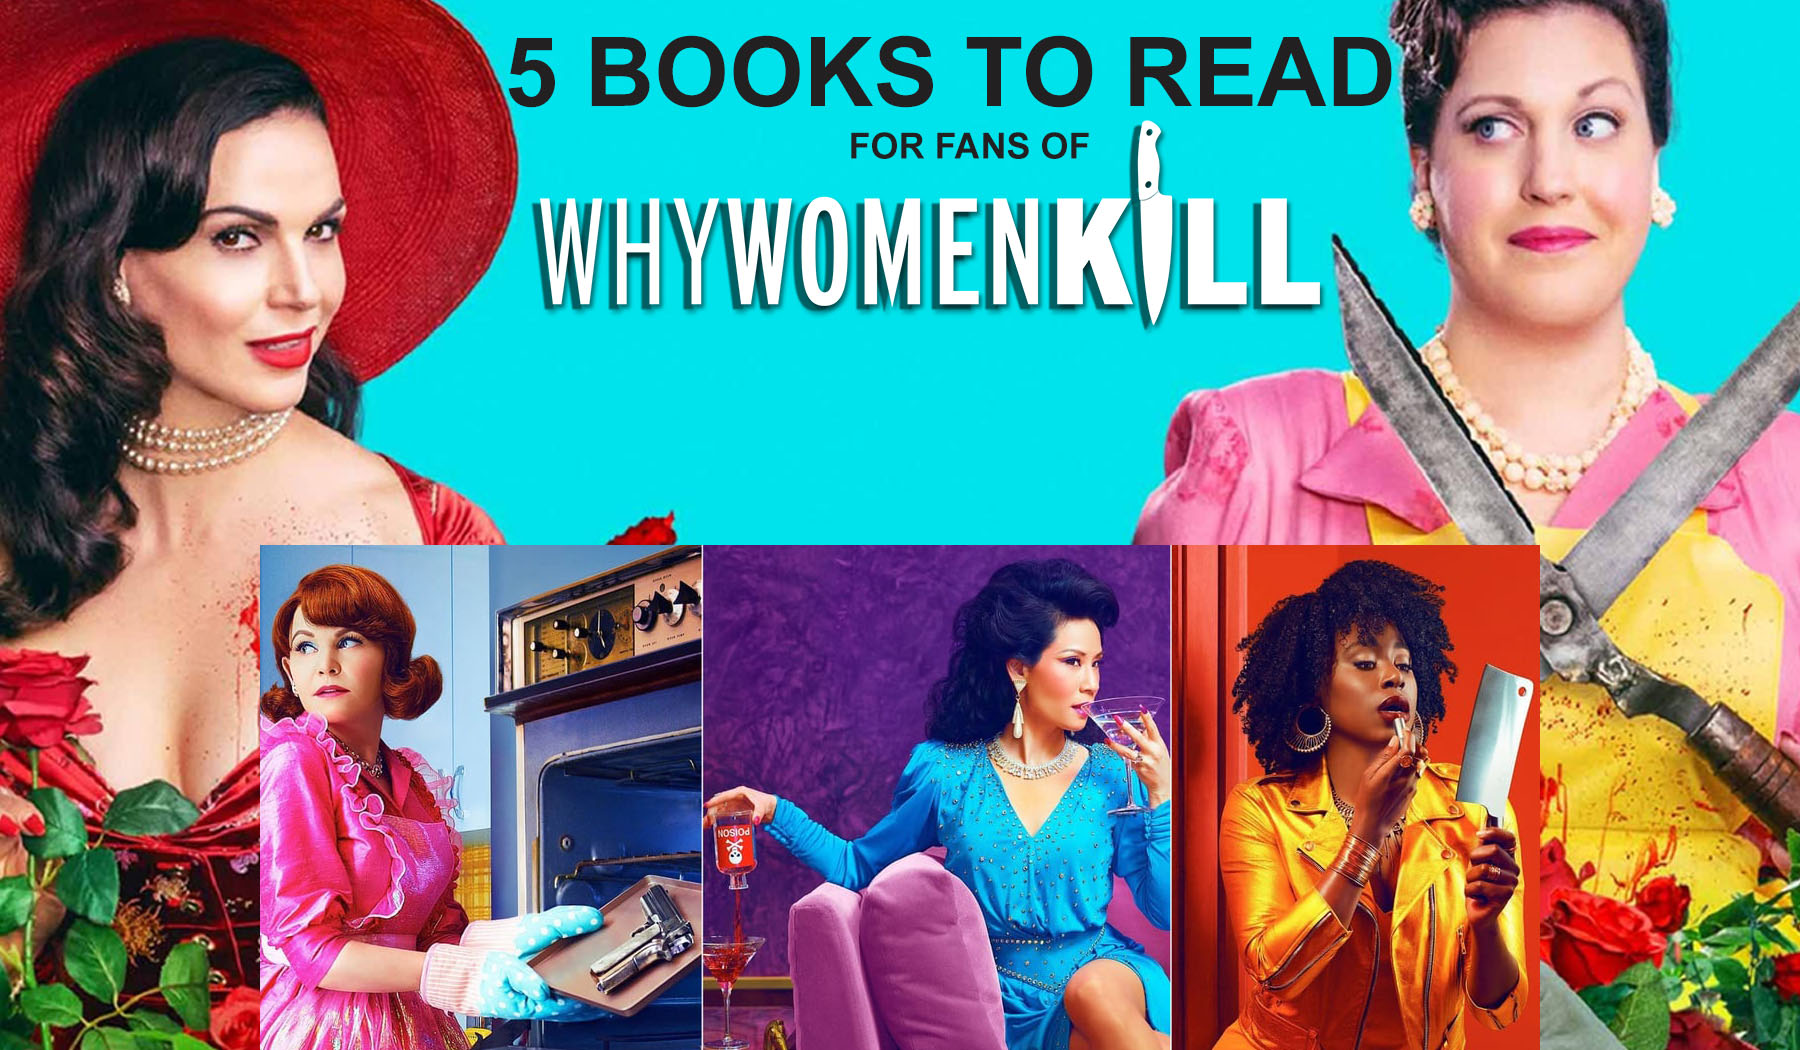 5 Books to Read for Fans of Why Women Kill - Worlds Best Story